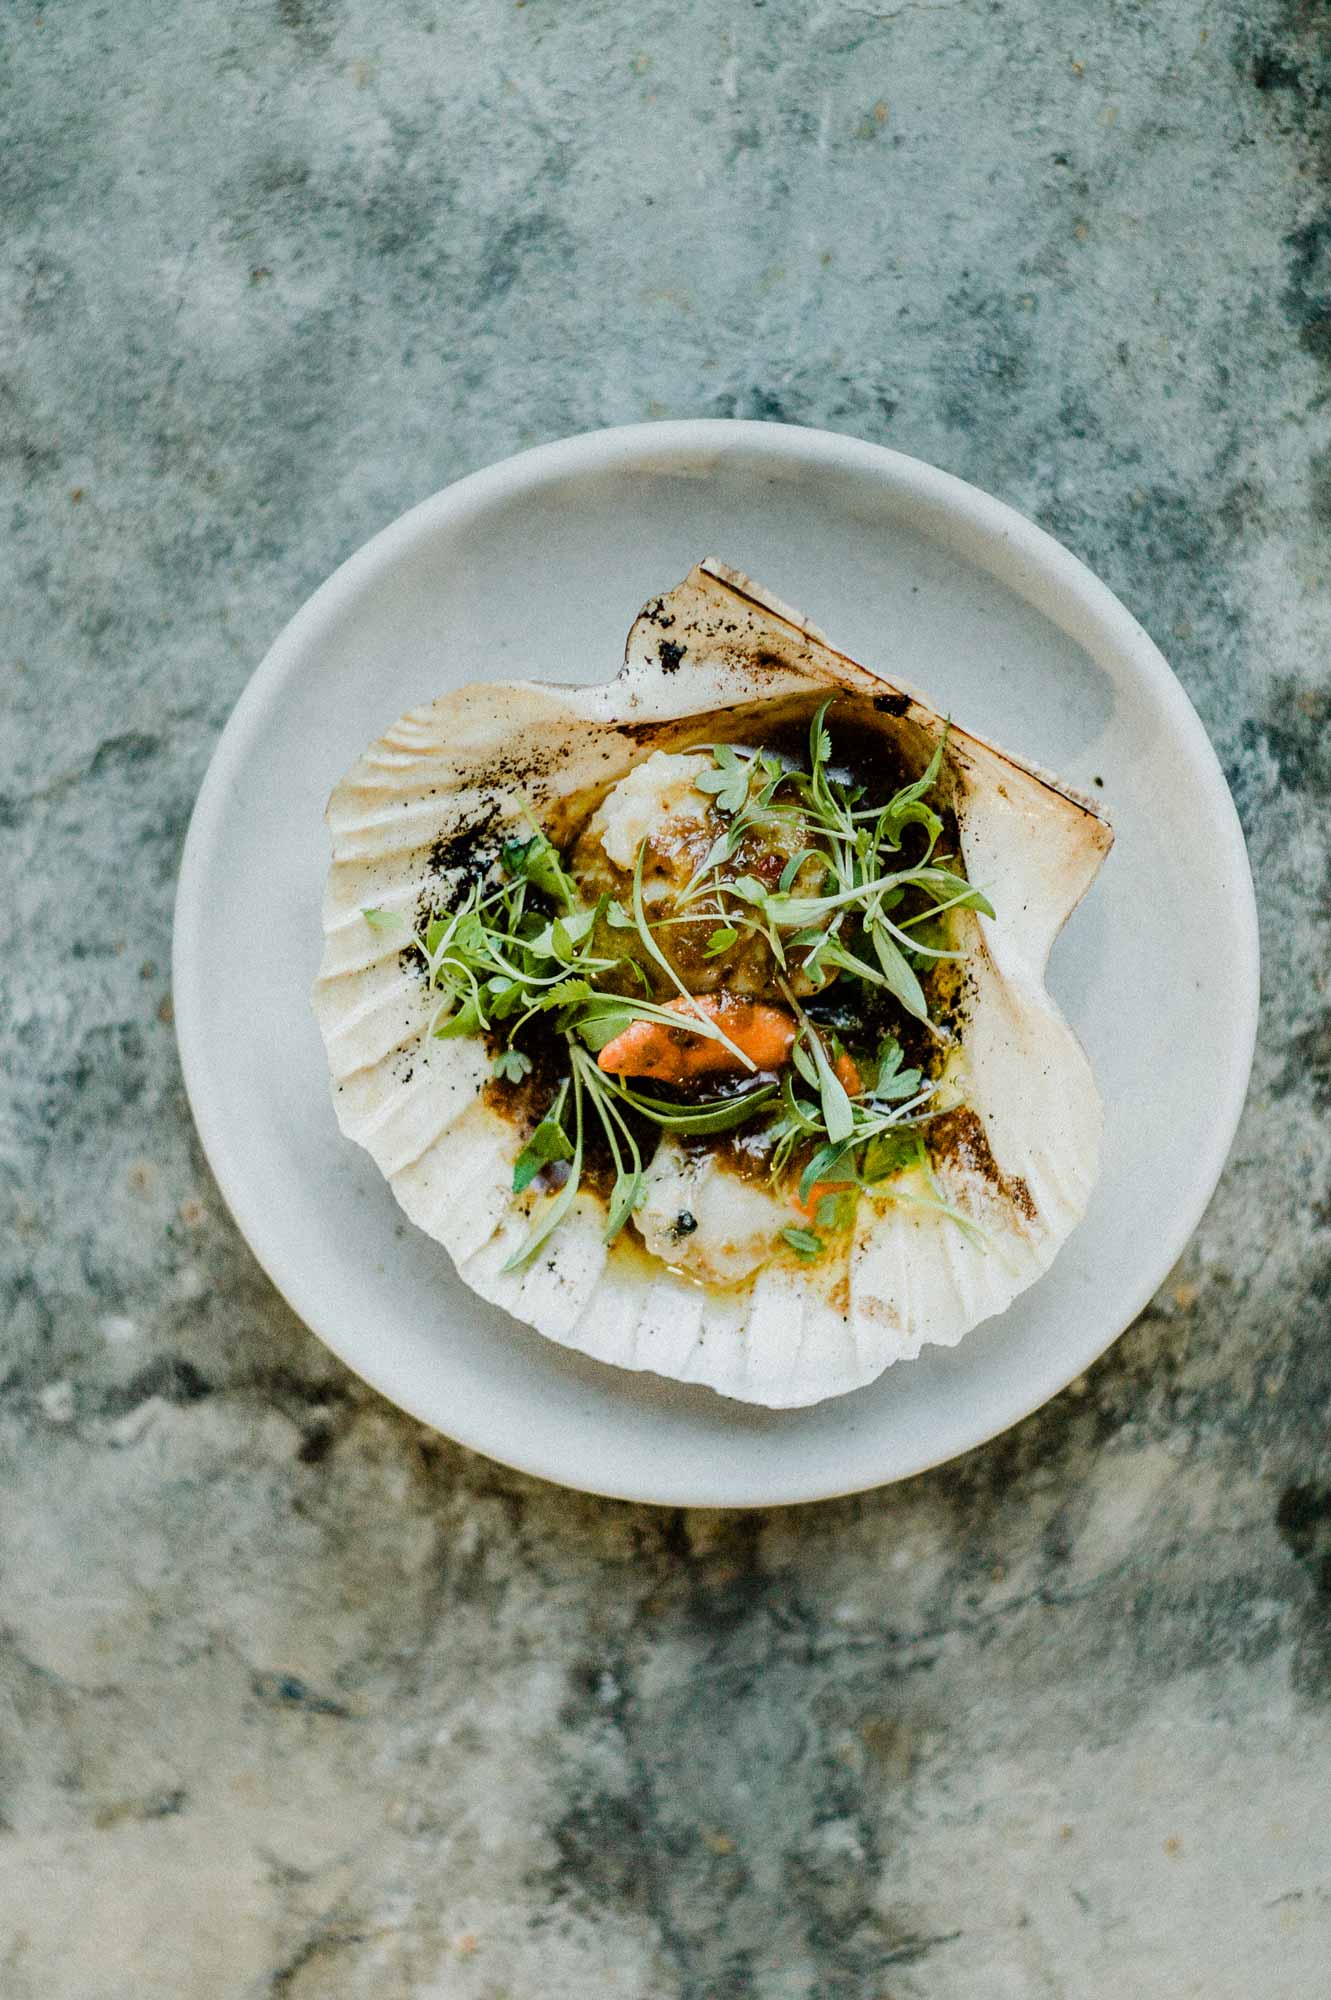 Fresh local scallop in its shell garnished with greens